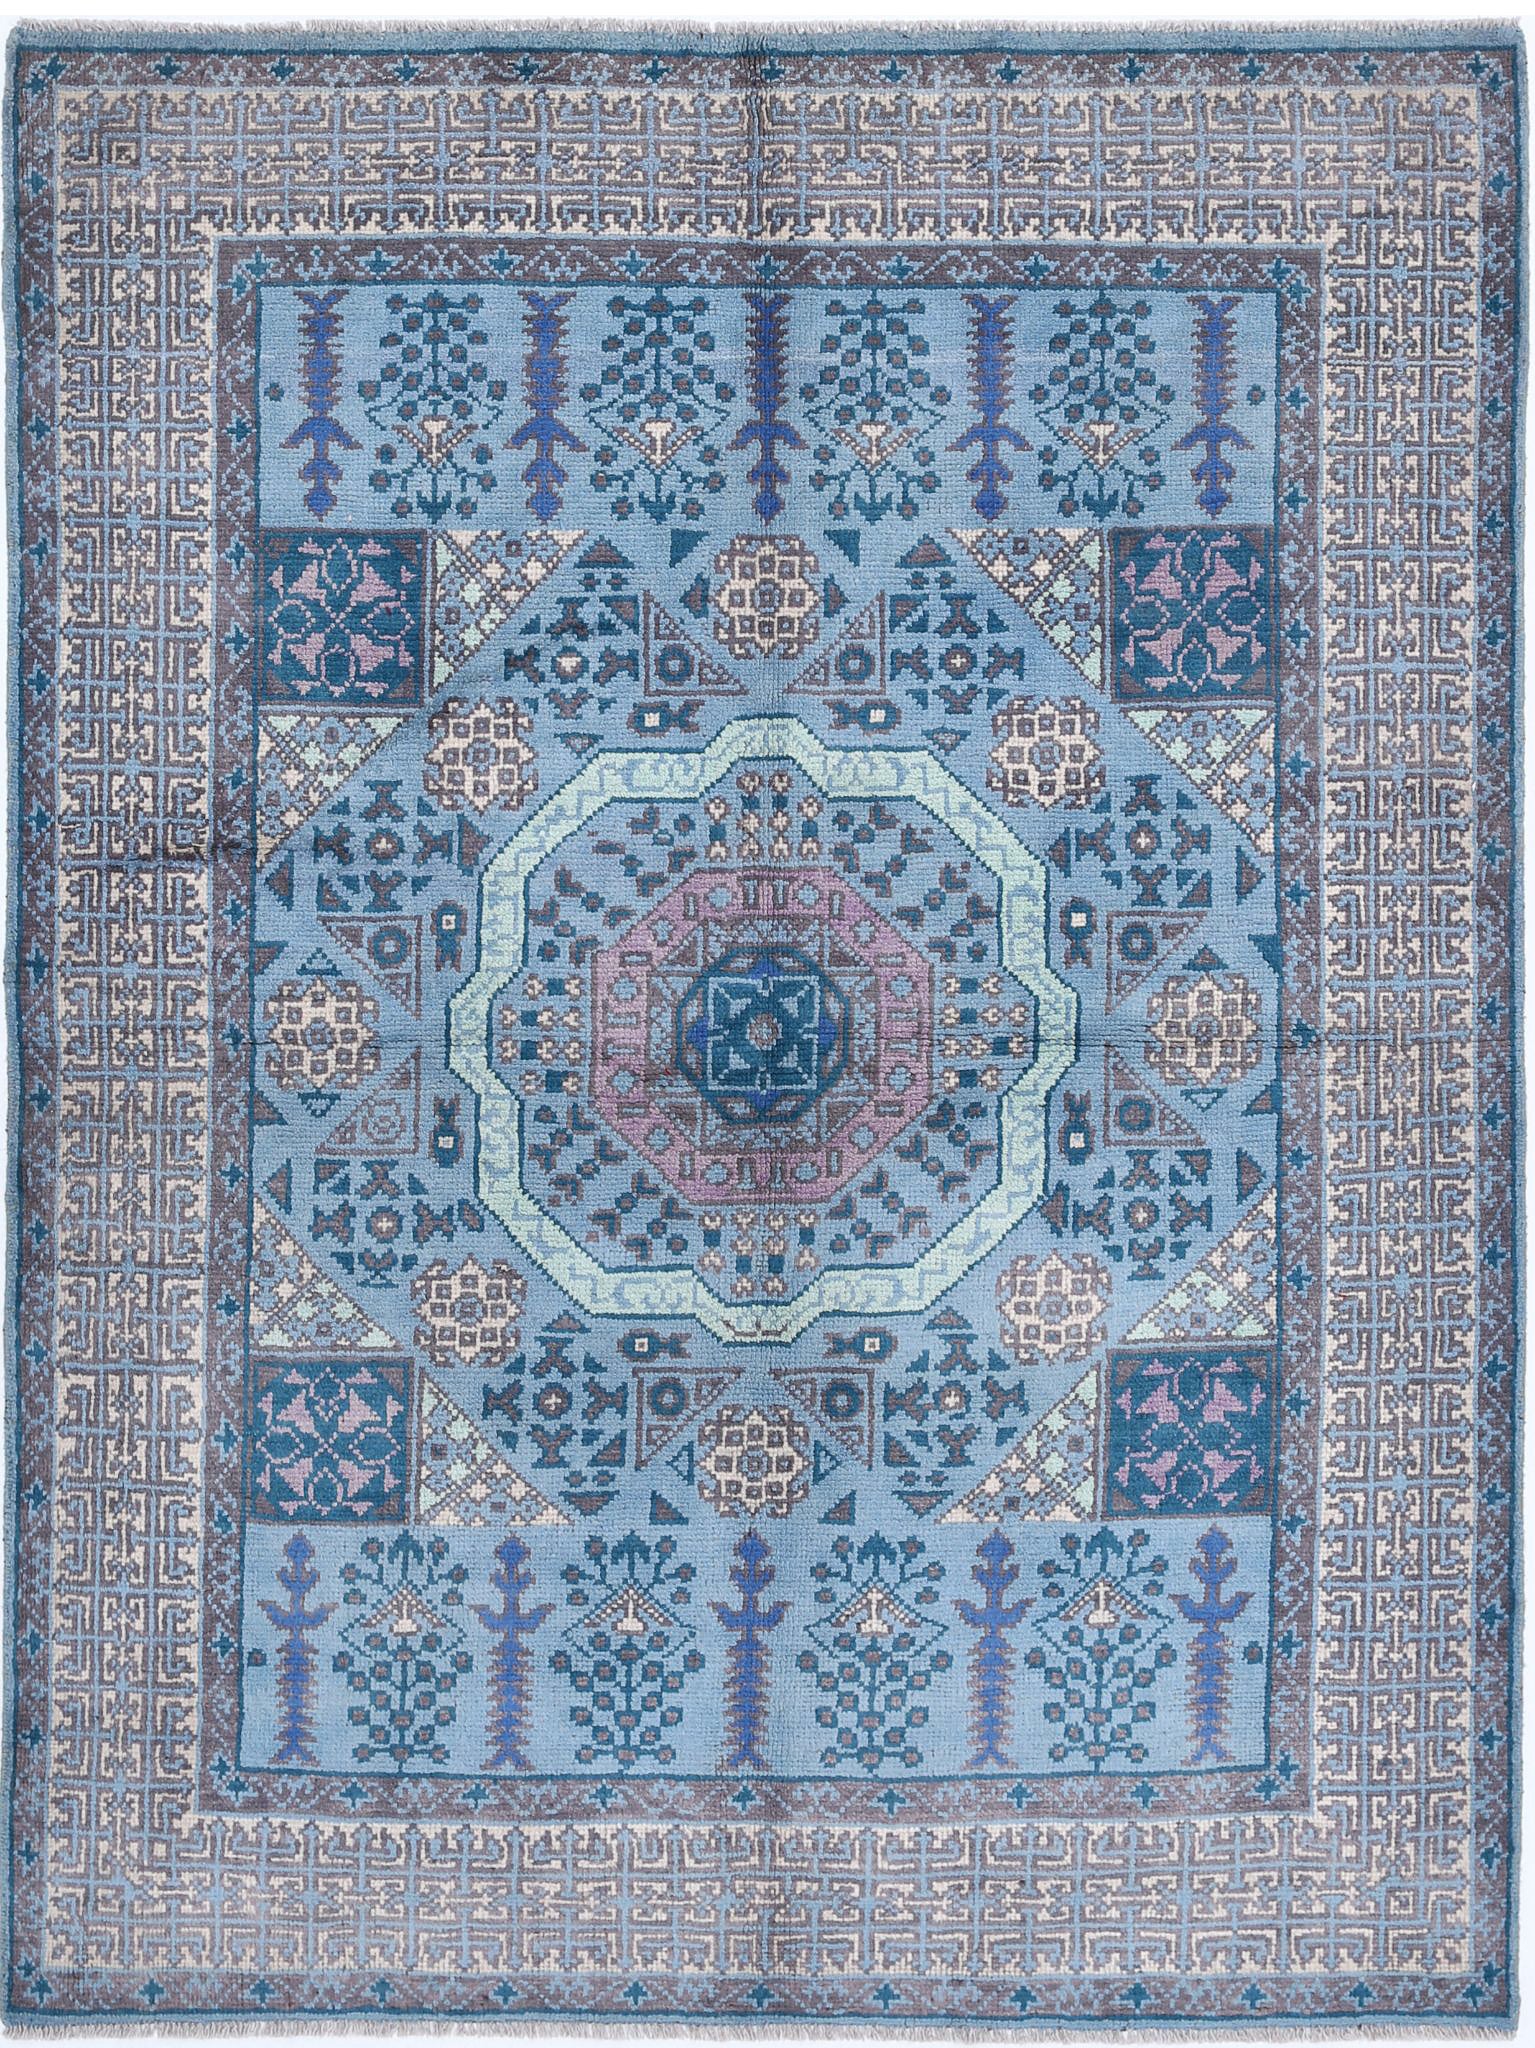 Revival-hand-knotted-qarghani-wool-rug-5014091.jpg